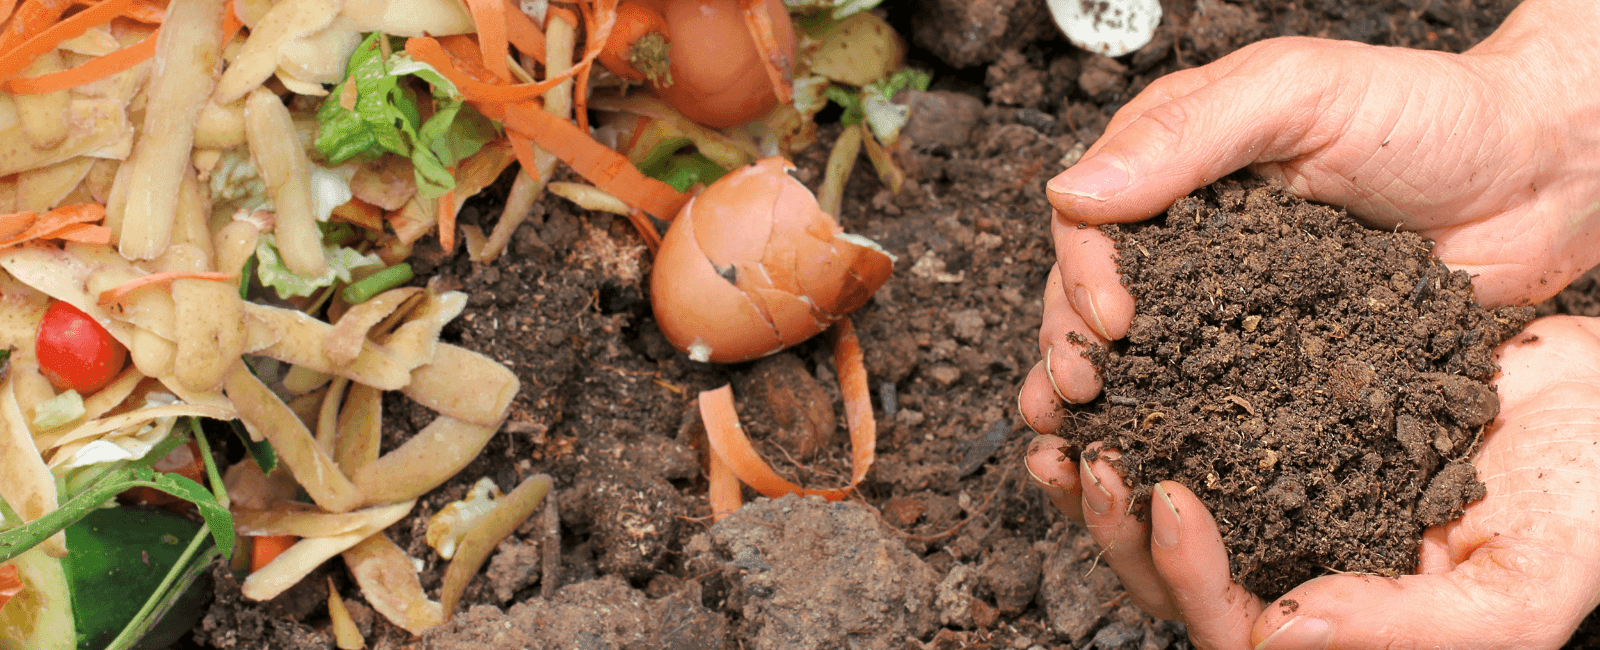 Specialized Microbes Found to Enhance the Composting Process of Agricultural Waste